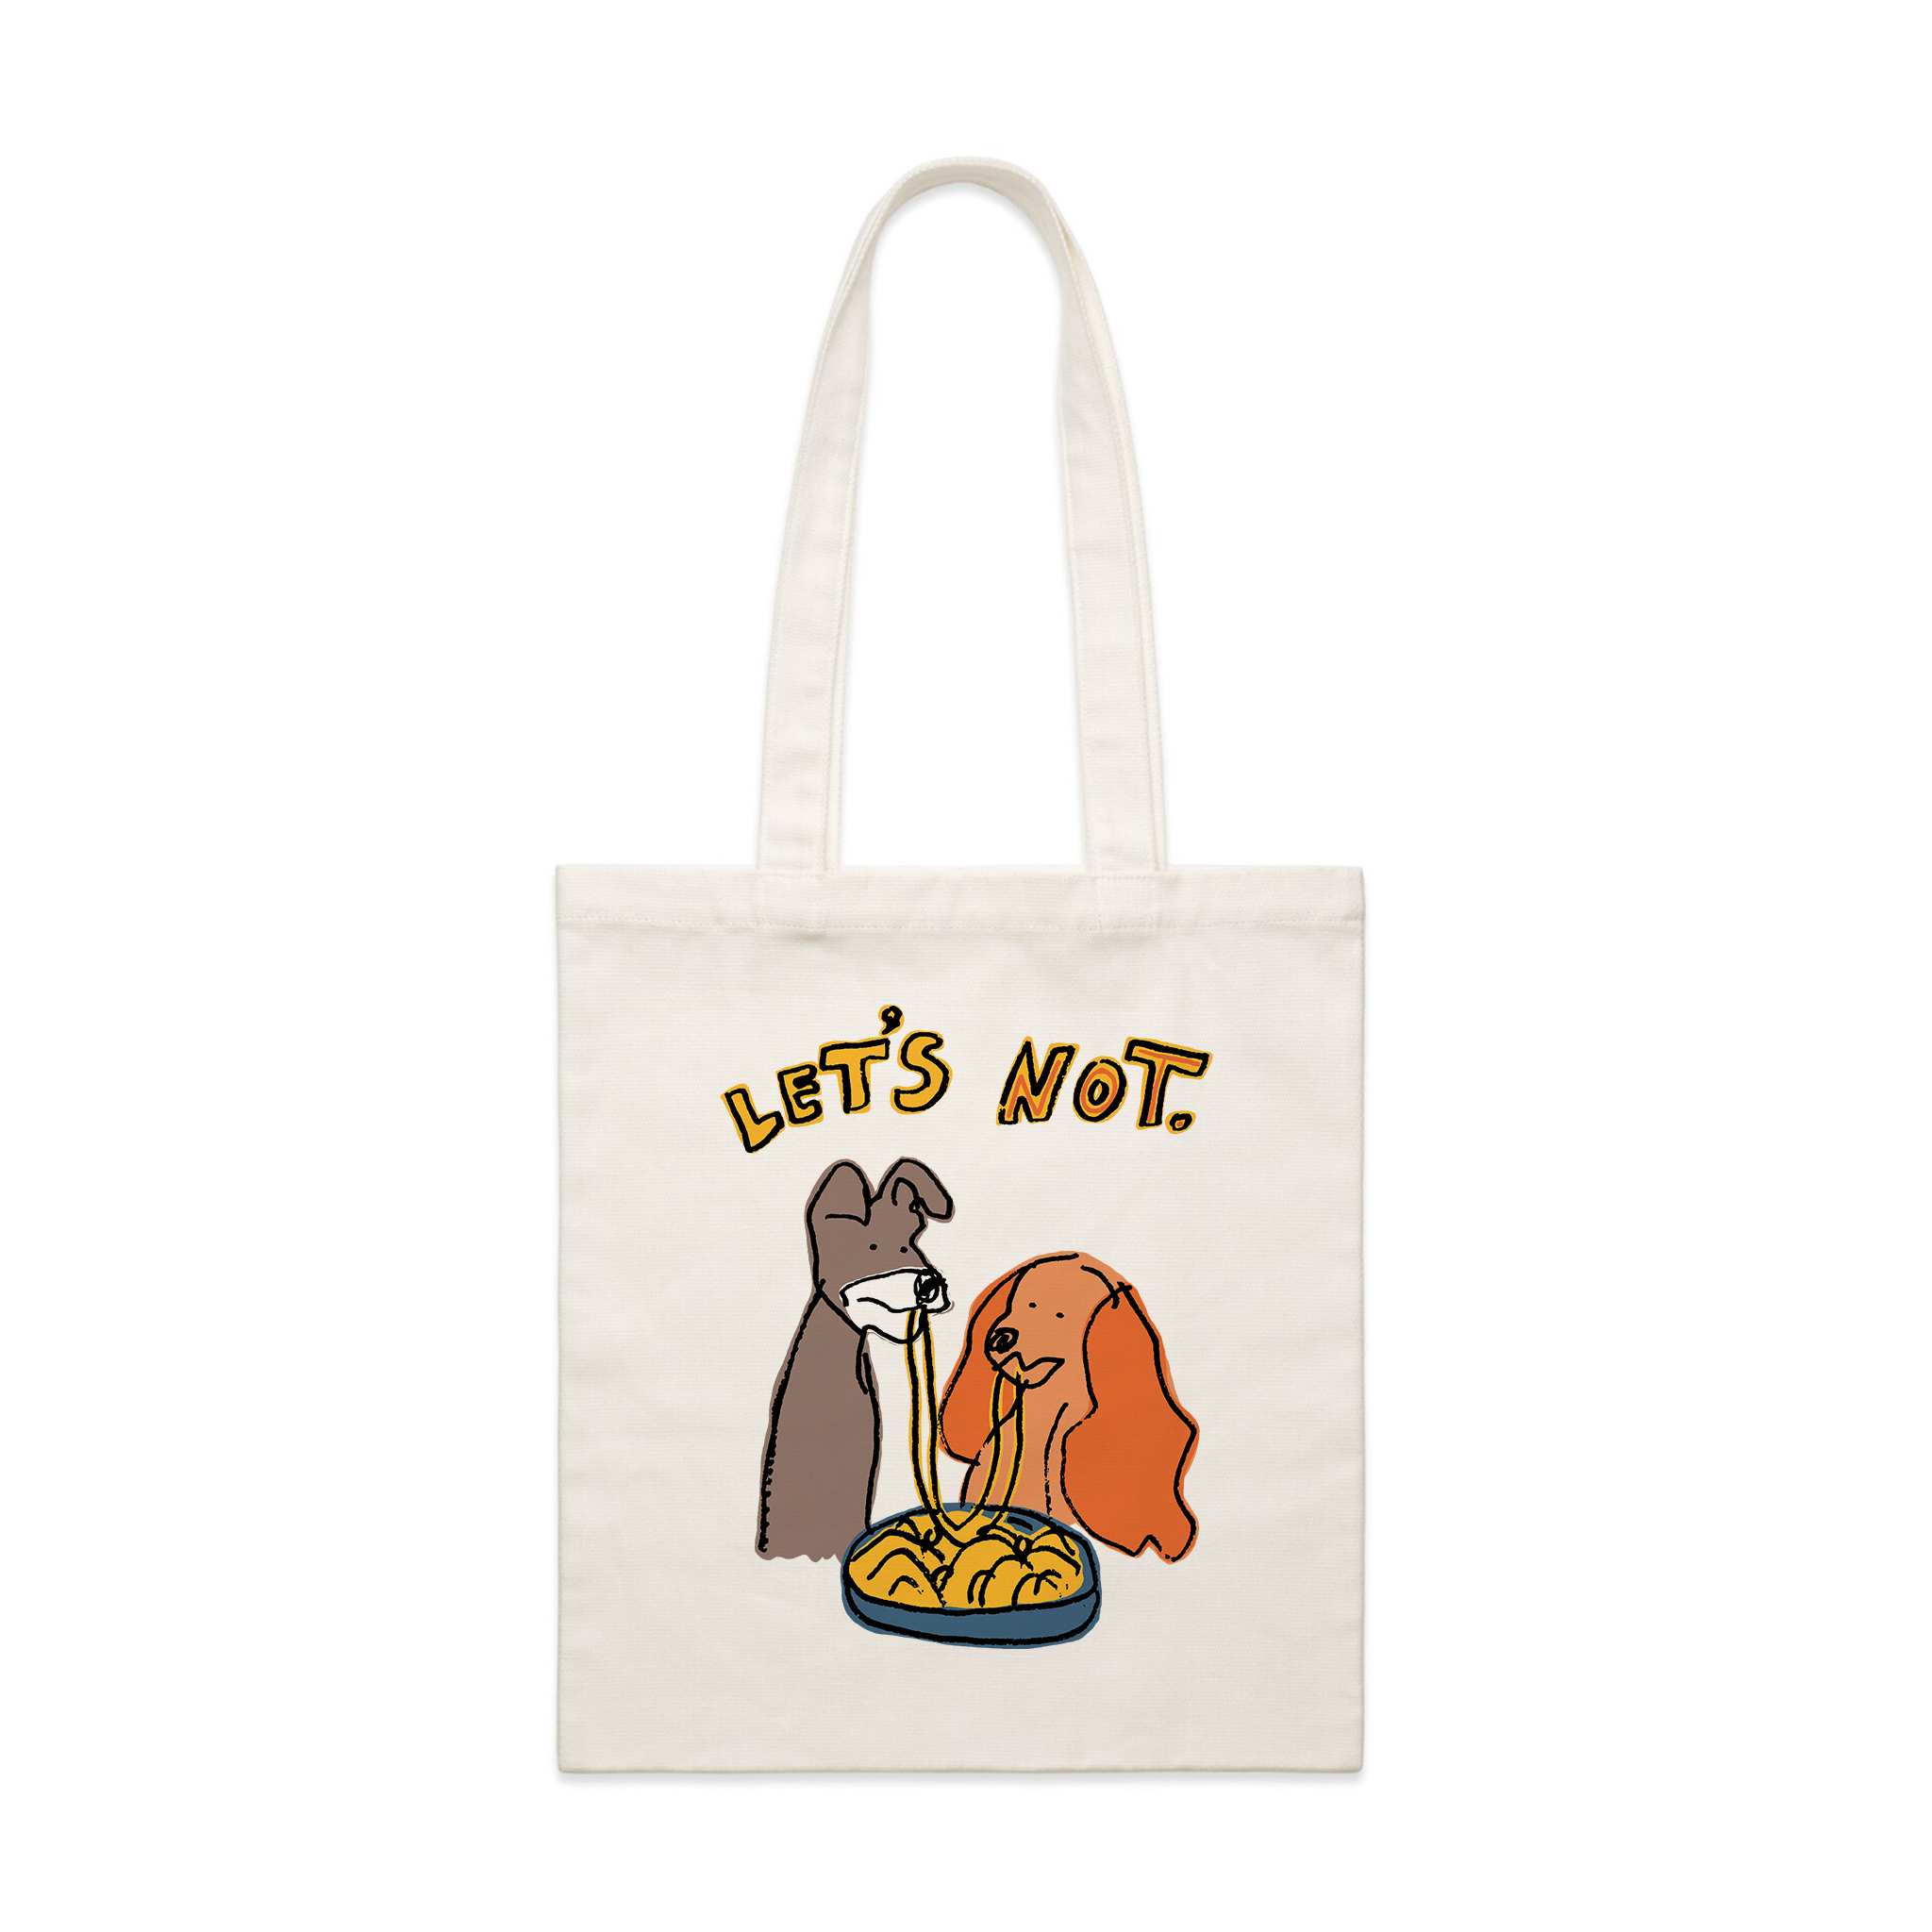 Let's Not Tote